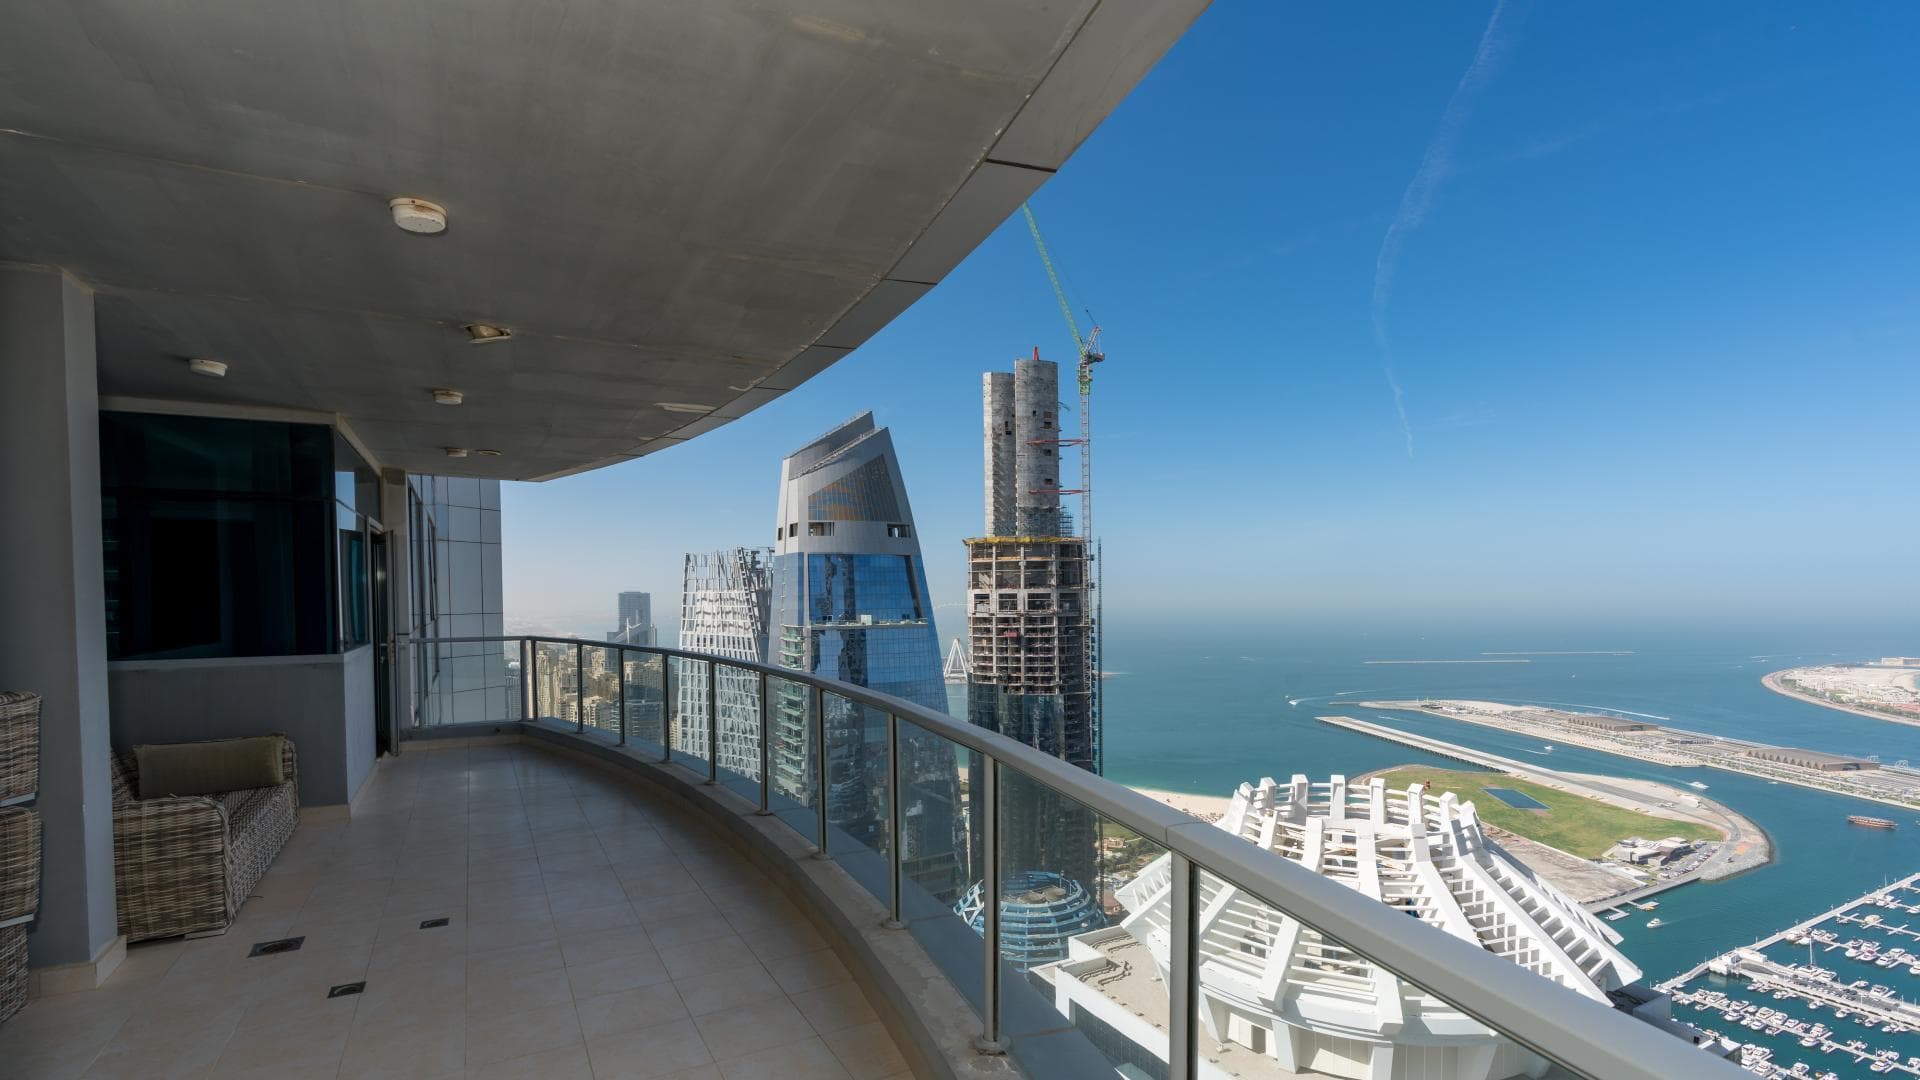 3 Bedroom Penthouse For Sale Torch Tower Lp37252 1ddb830598745700.jpg